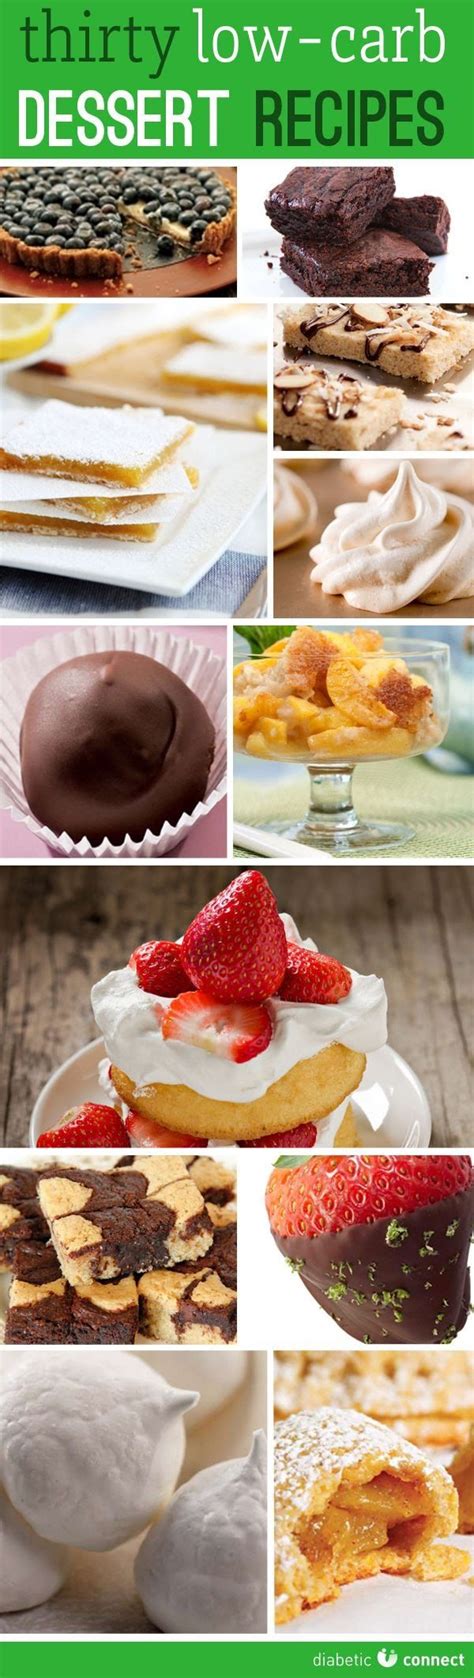 The most famous ones are: Most Popular Low Carb Desserts | Low carb recipes dessert ...